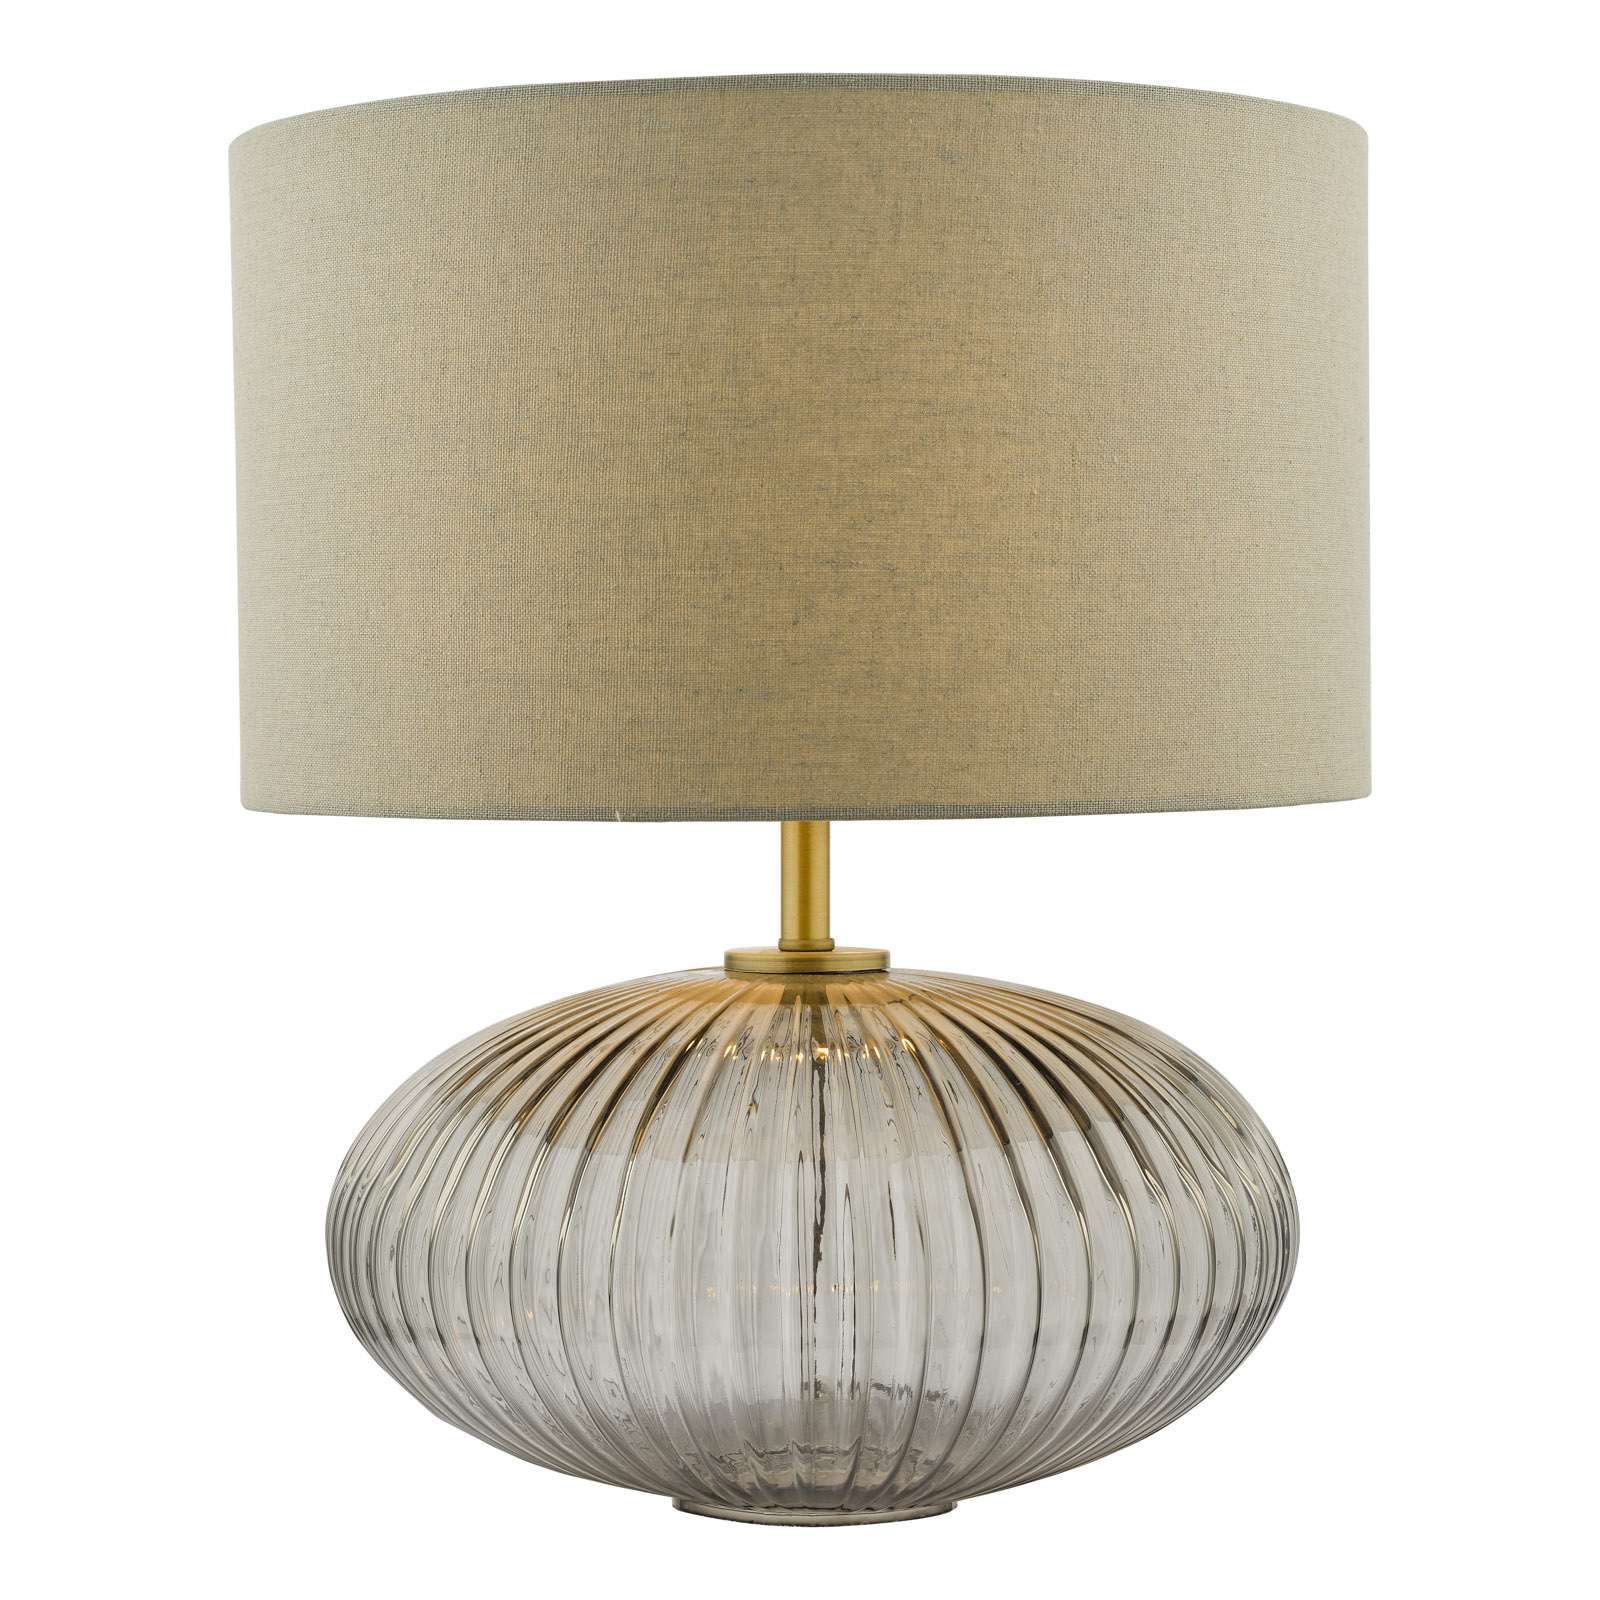 Edmond Lamp Smoked Glass Antique Brass Detail With Shade